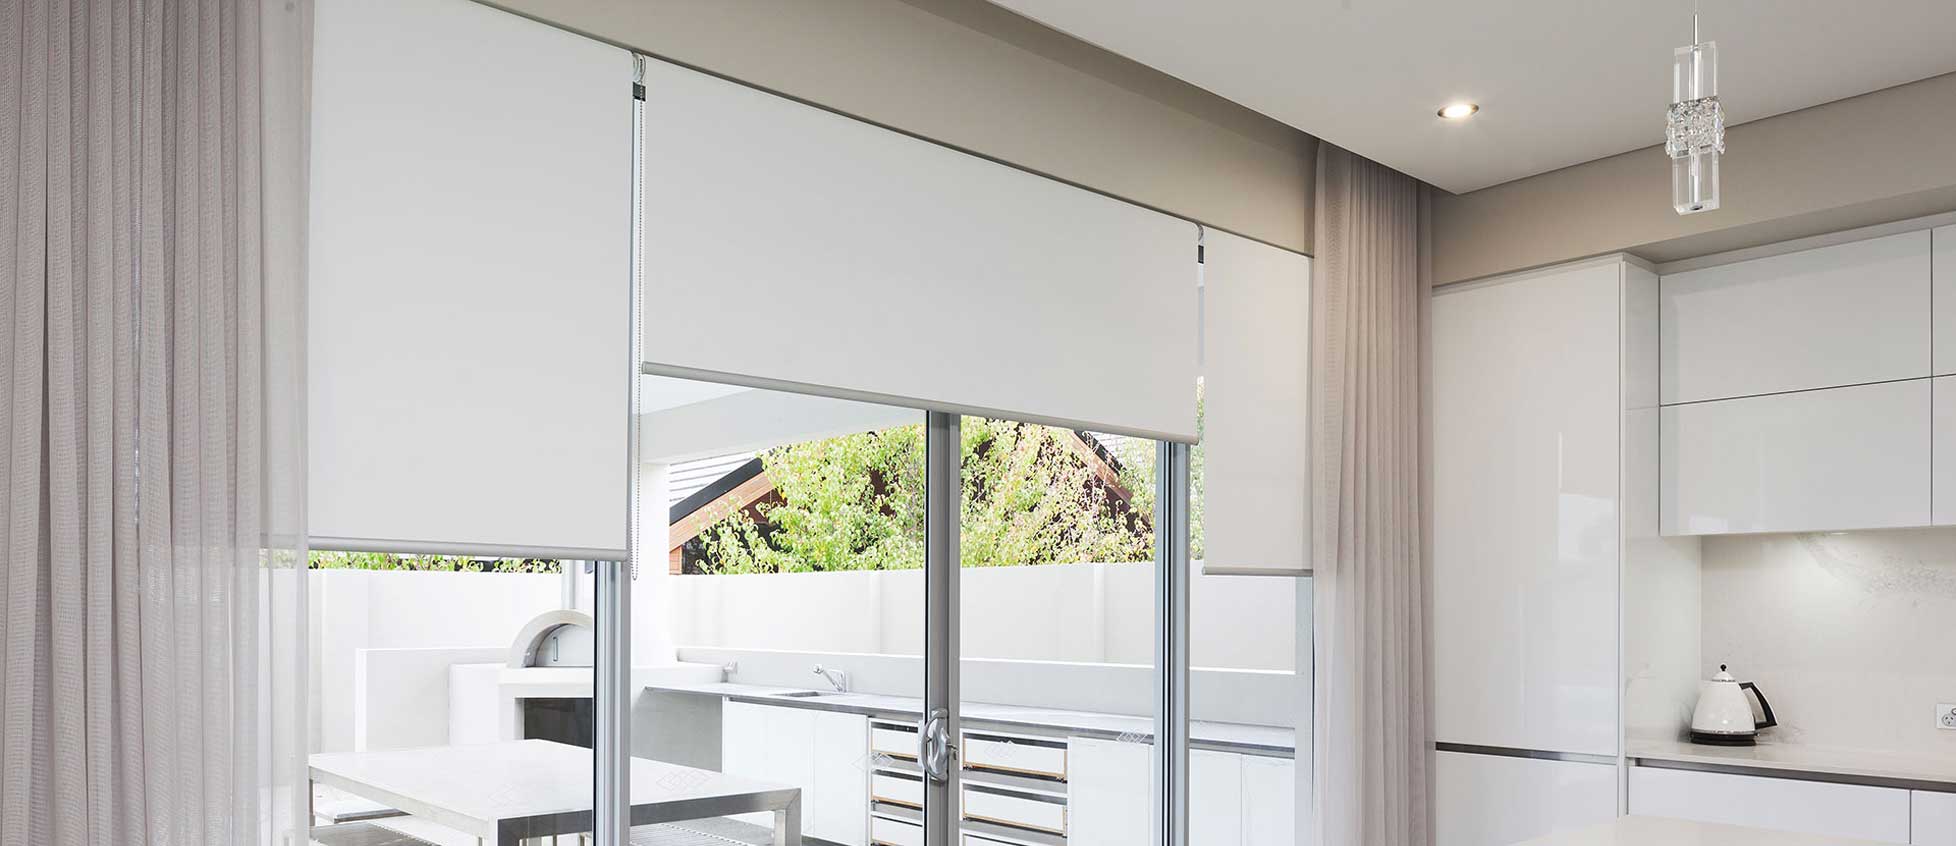 Blinds-with-sheers-kitchen